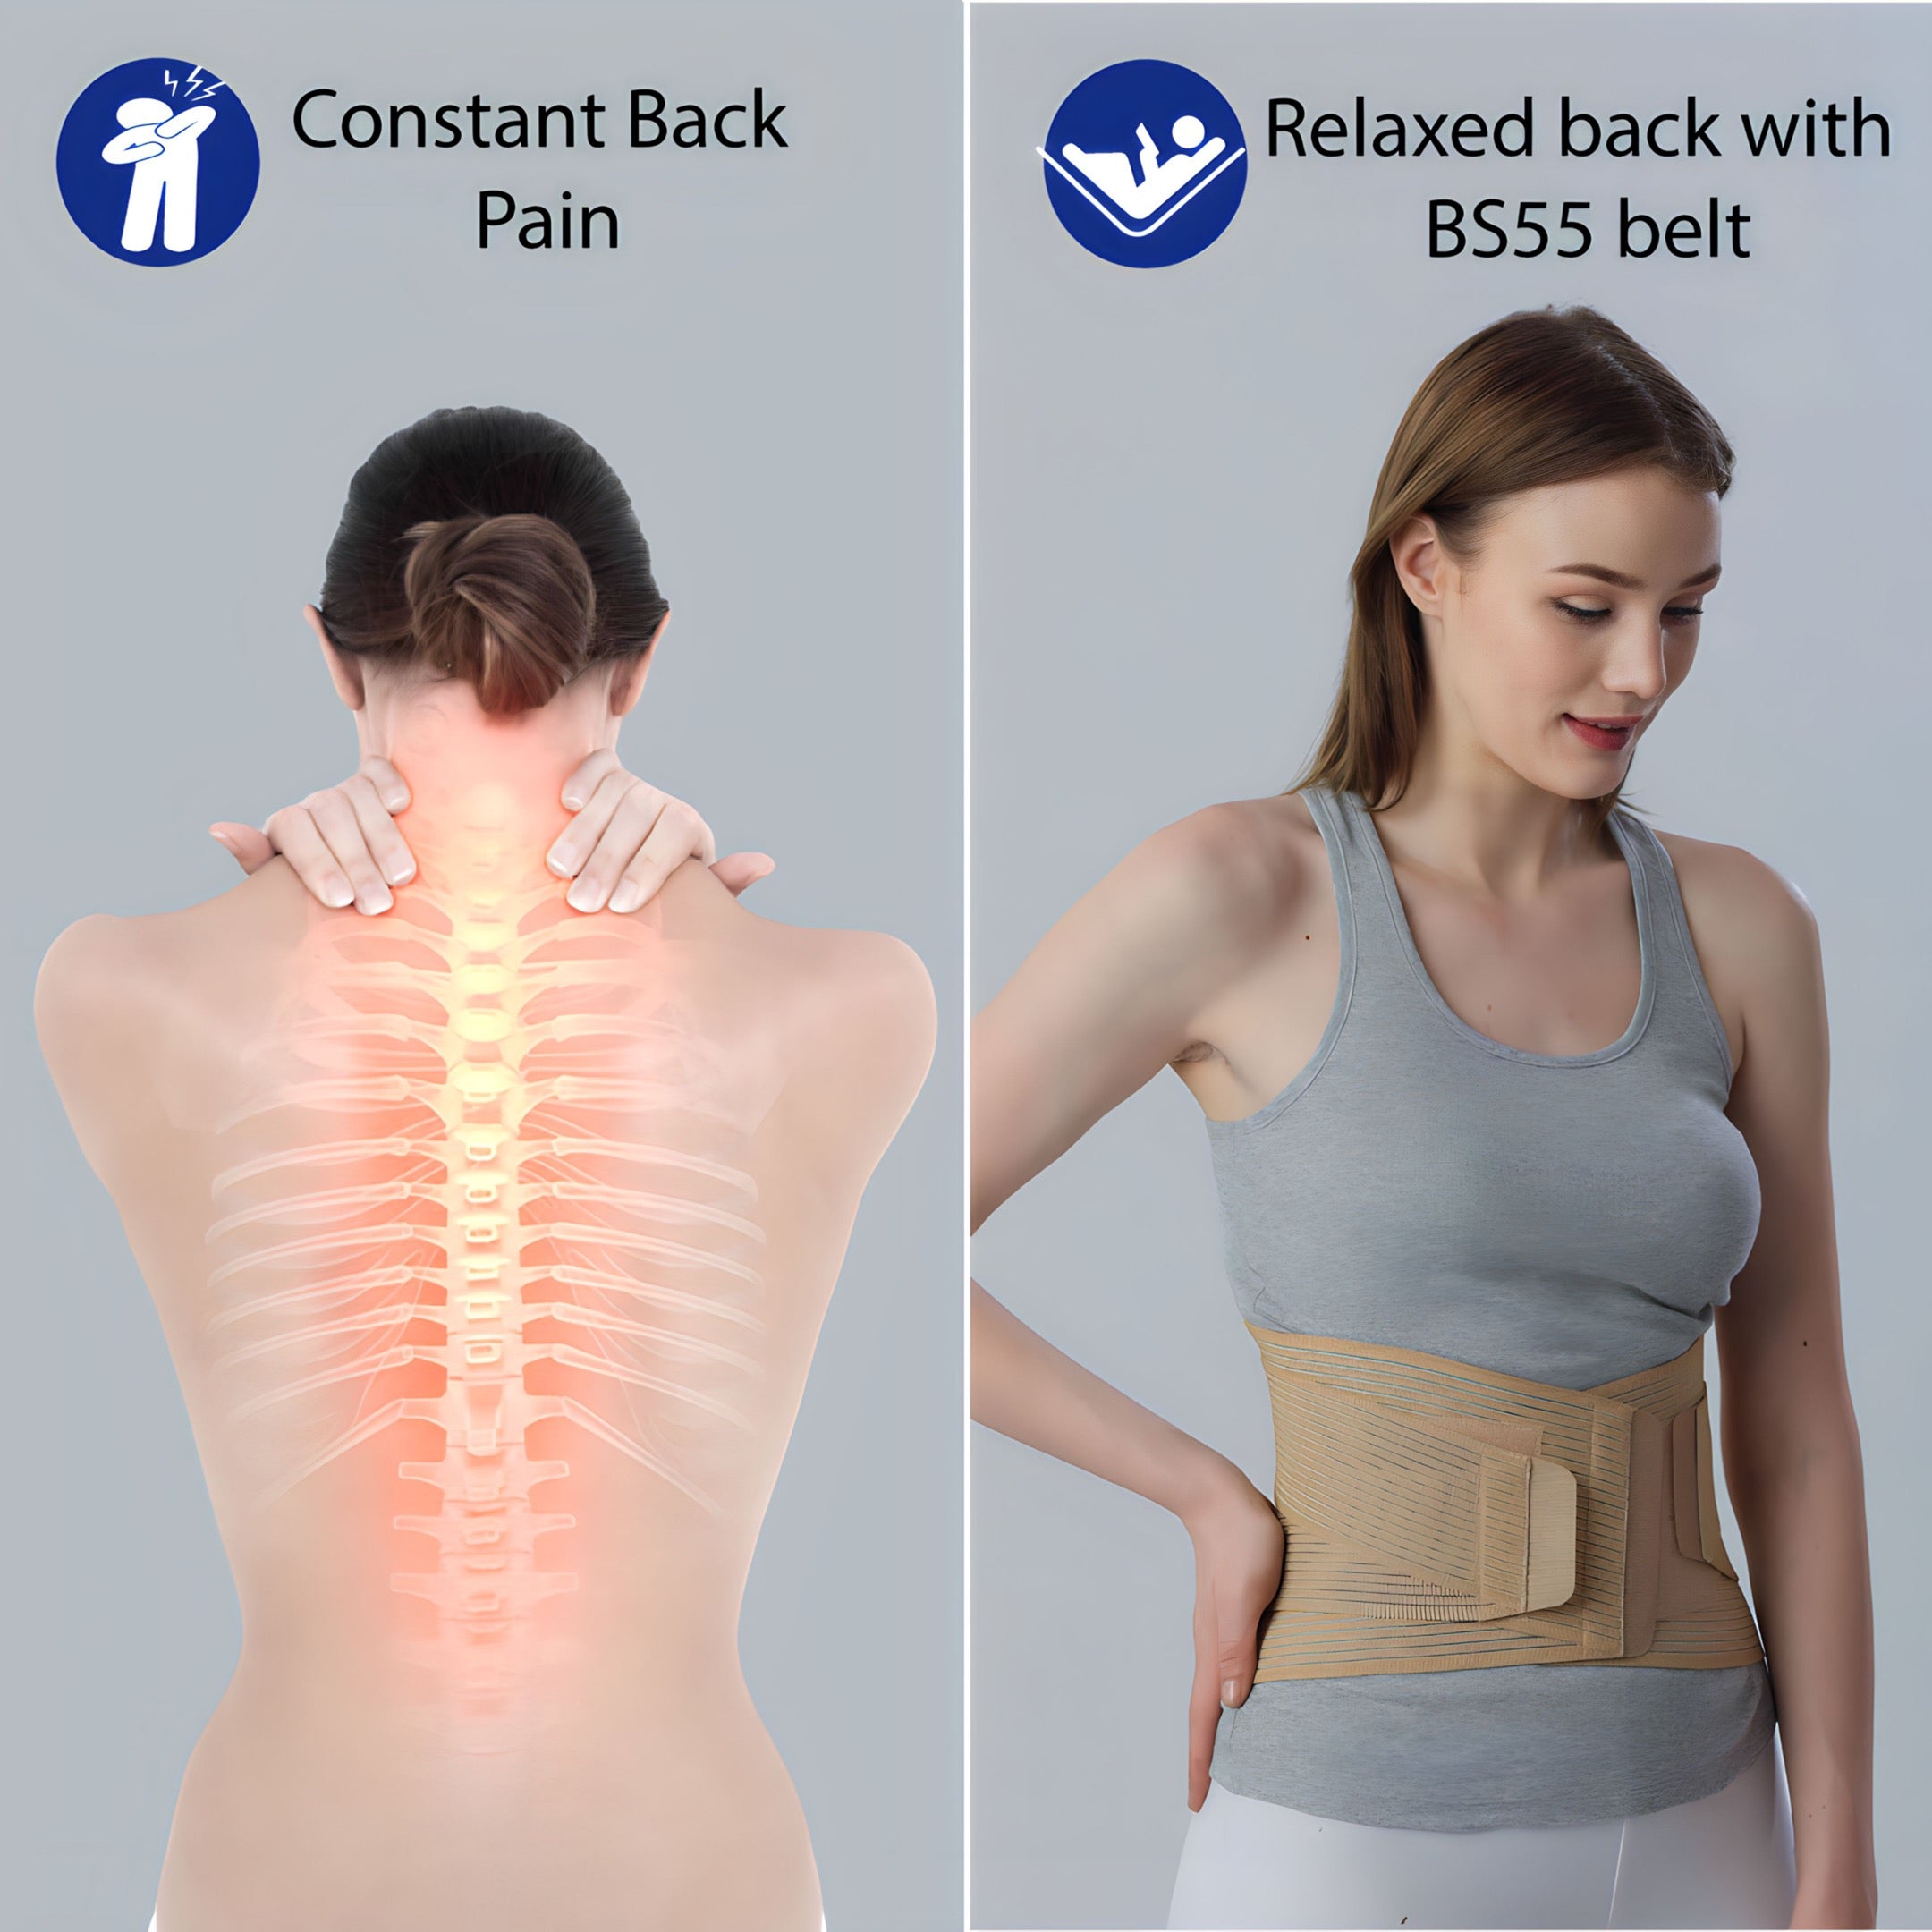 Buy Pain Relief Back Support Belt Online at Best Price in India on